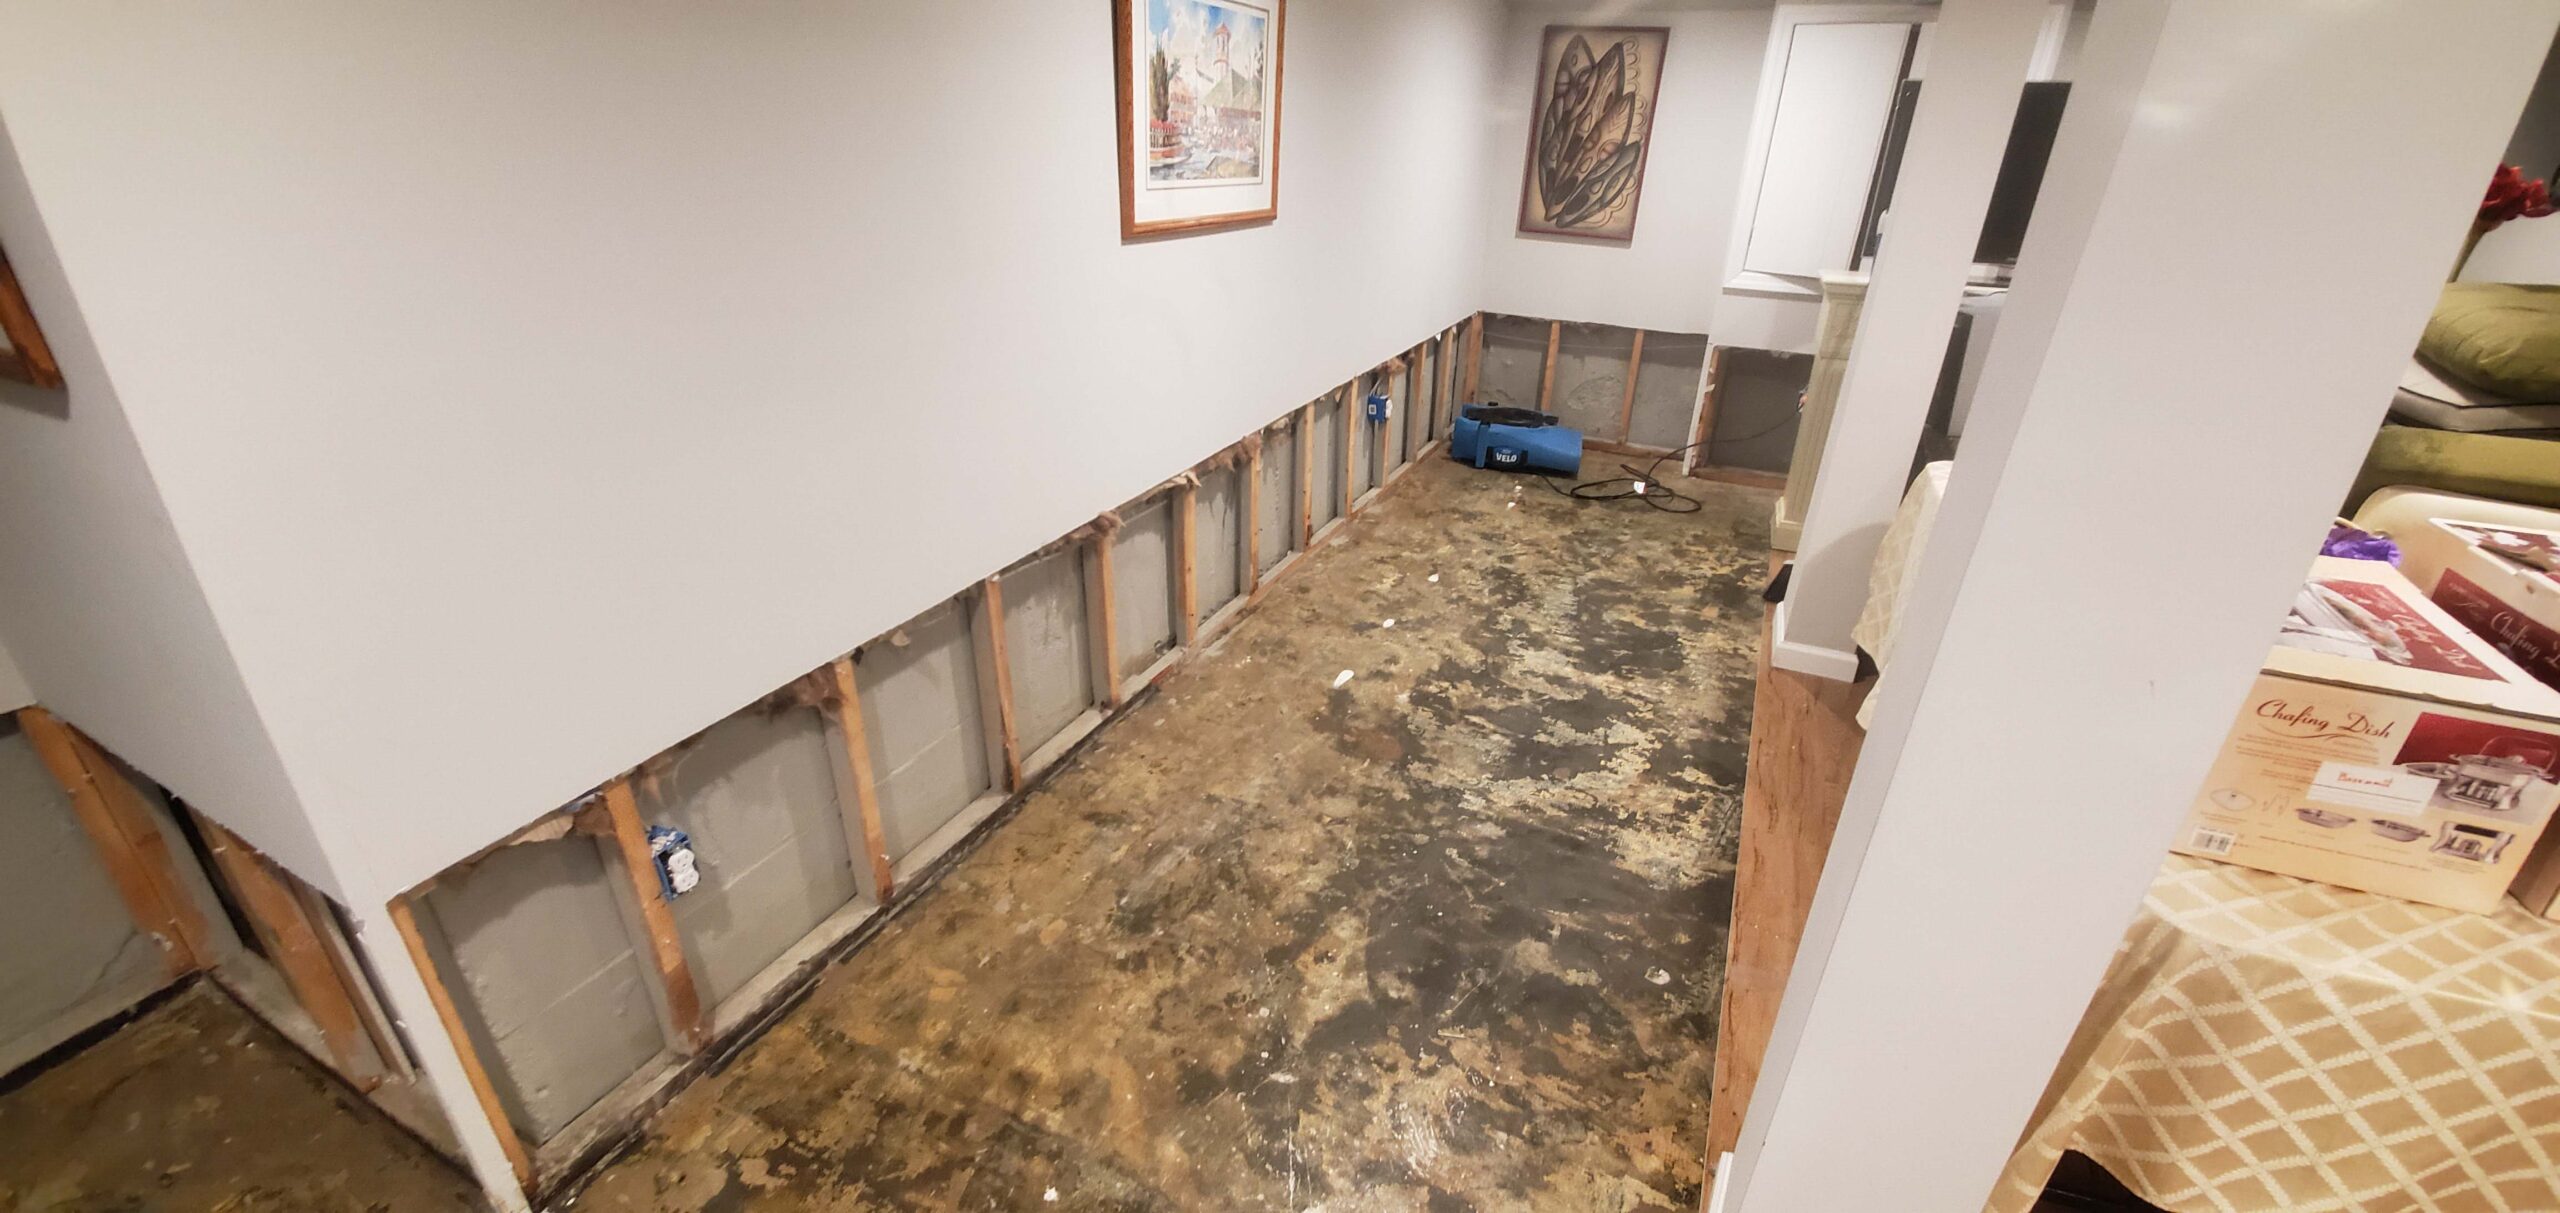 water damage contractor in plainview, ny 11803